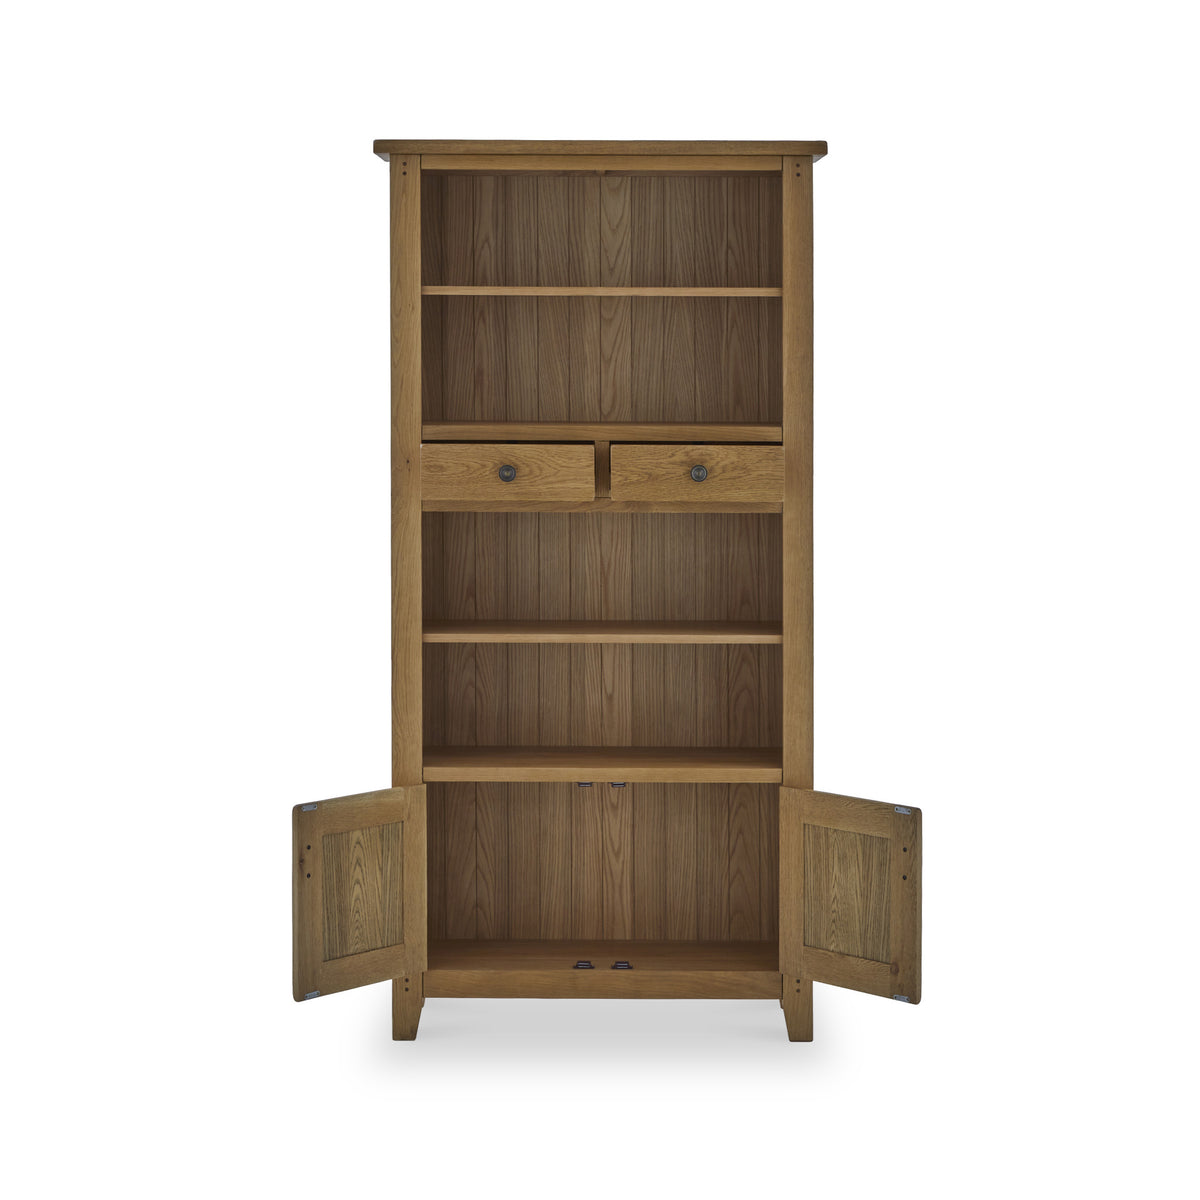 Broadway Oak Display Bookcase with drawers and doors